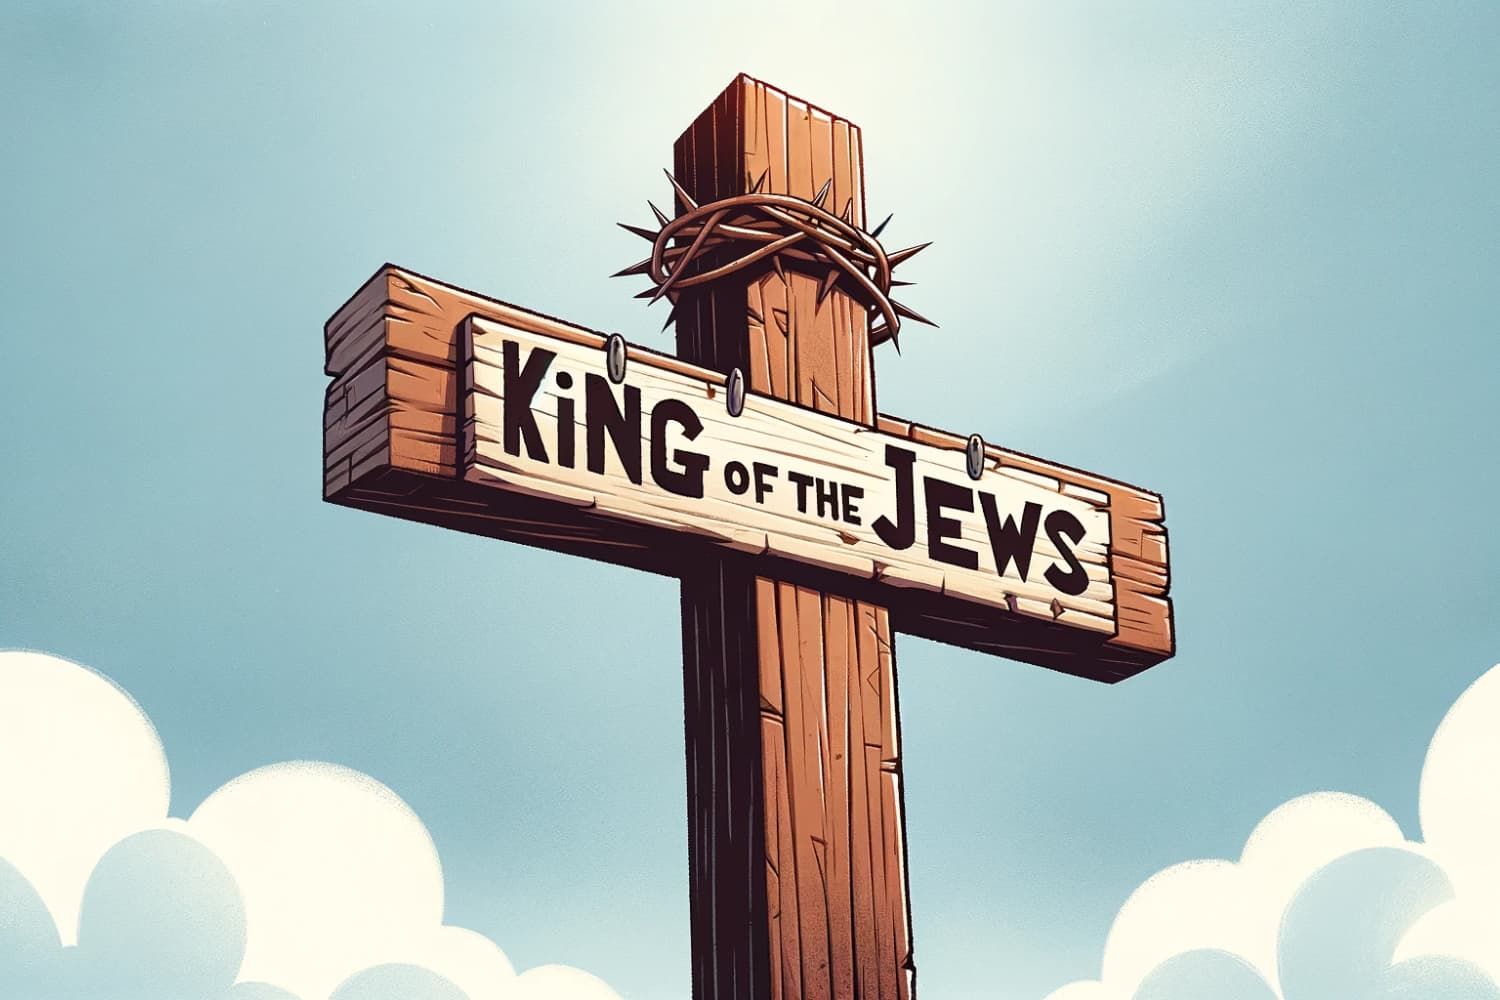 Lesson%20-%20NT%20Easter%2006%20-%20Jesus%20king%20of%20the%20Jews-1a7fec3c Peace